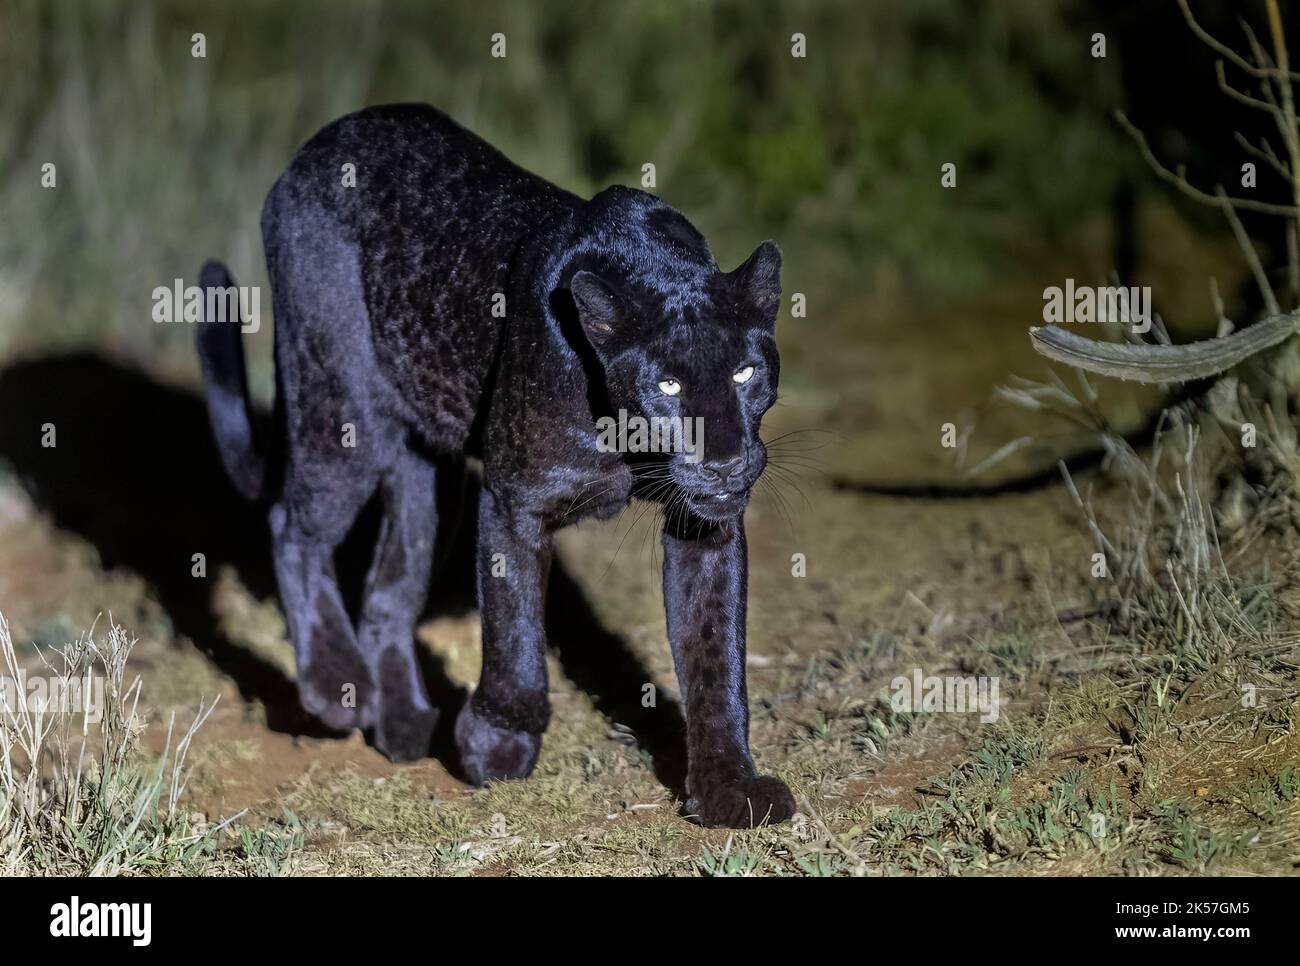 Kenya, Laikipia County, Extremely rare photo of a Black Panther or African  Black Leopard (Panthera pardus pardus), melanistic form, evolving at night  in dry shrubby savannah, very special leopard subspecies,Body partially  digitally